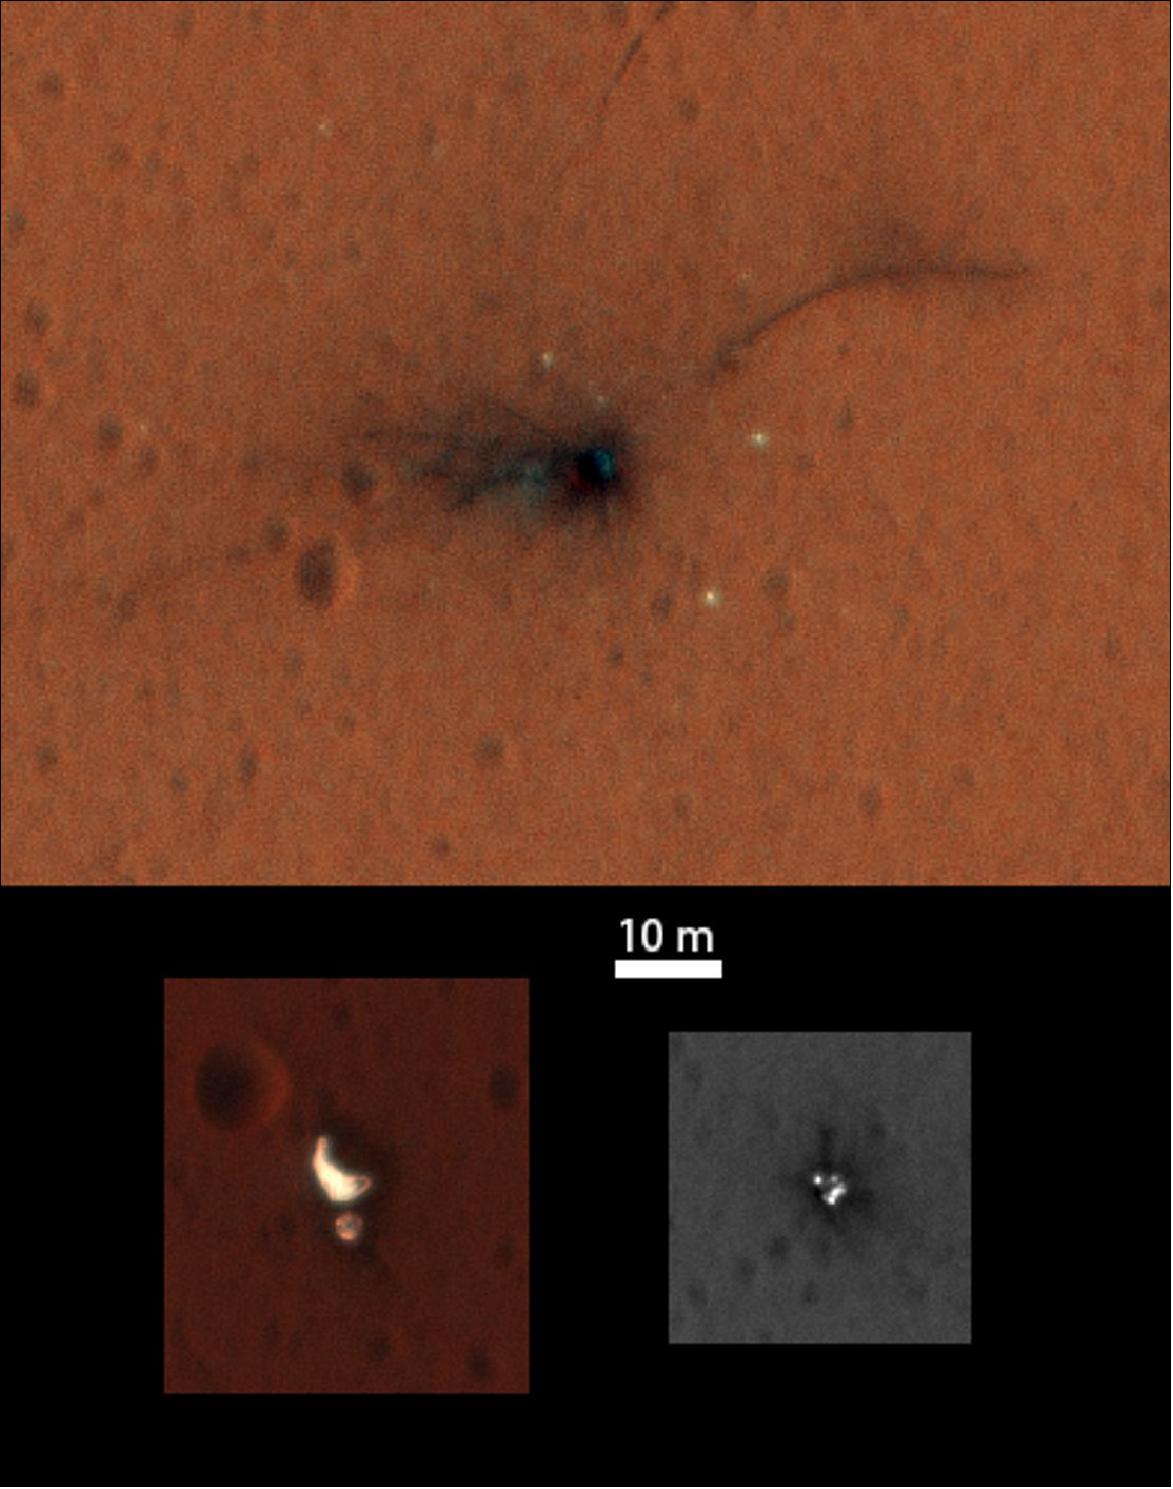 Figure 125: Composite of the ExoMars Schiaparelli module elements seen by NASA's HiRISE (High Resolution Imaging Science Experiment) on MRO on Nov. 1, 2016. Both the main impact site (top) and the region with the parachute and rear heatshield (bottom left) are now captured in the central portion of the HiRISE imaging swath that is imaged through three different filters, enabling a color image to be constructed. The front heatshield (bottom right) lies outside the central color imaging swath (image credit: NASA/JPL-Caltech/University of Arizona)